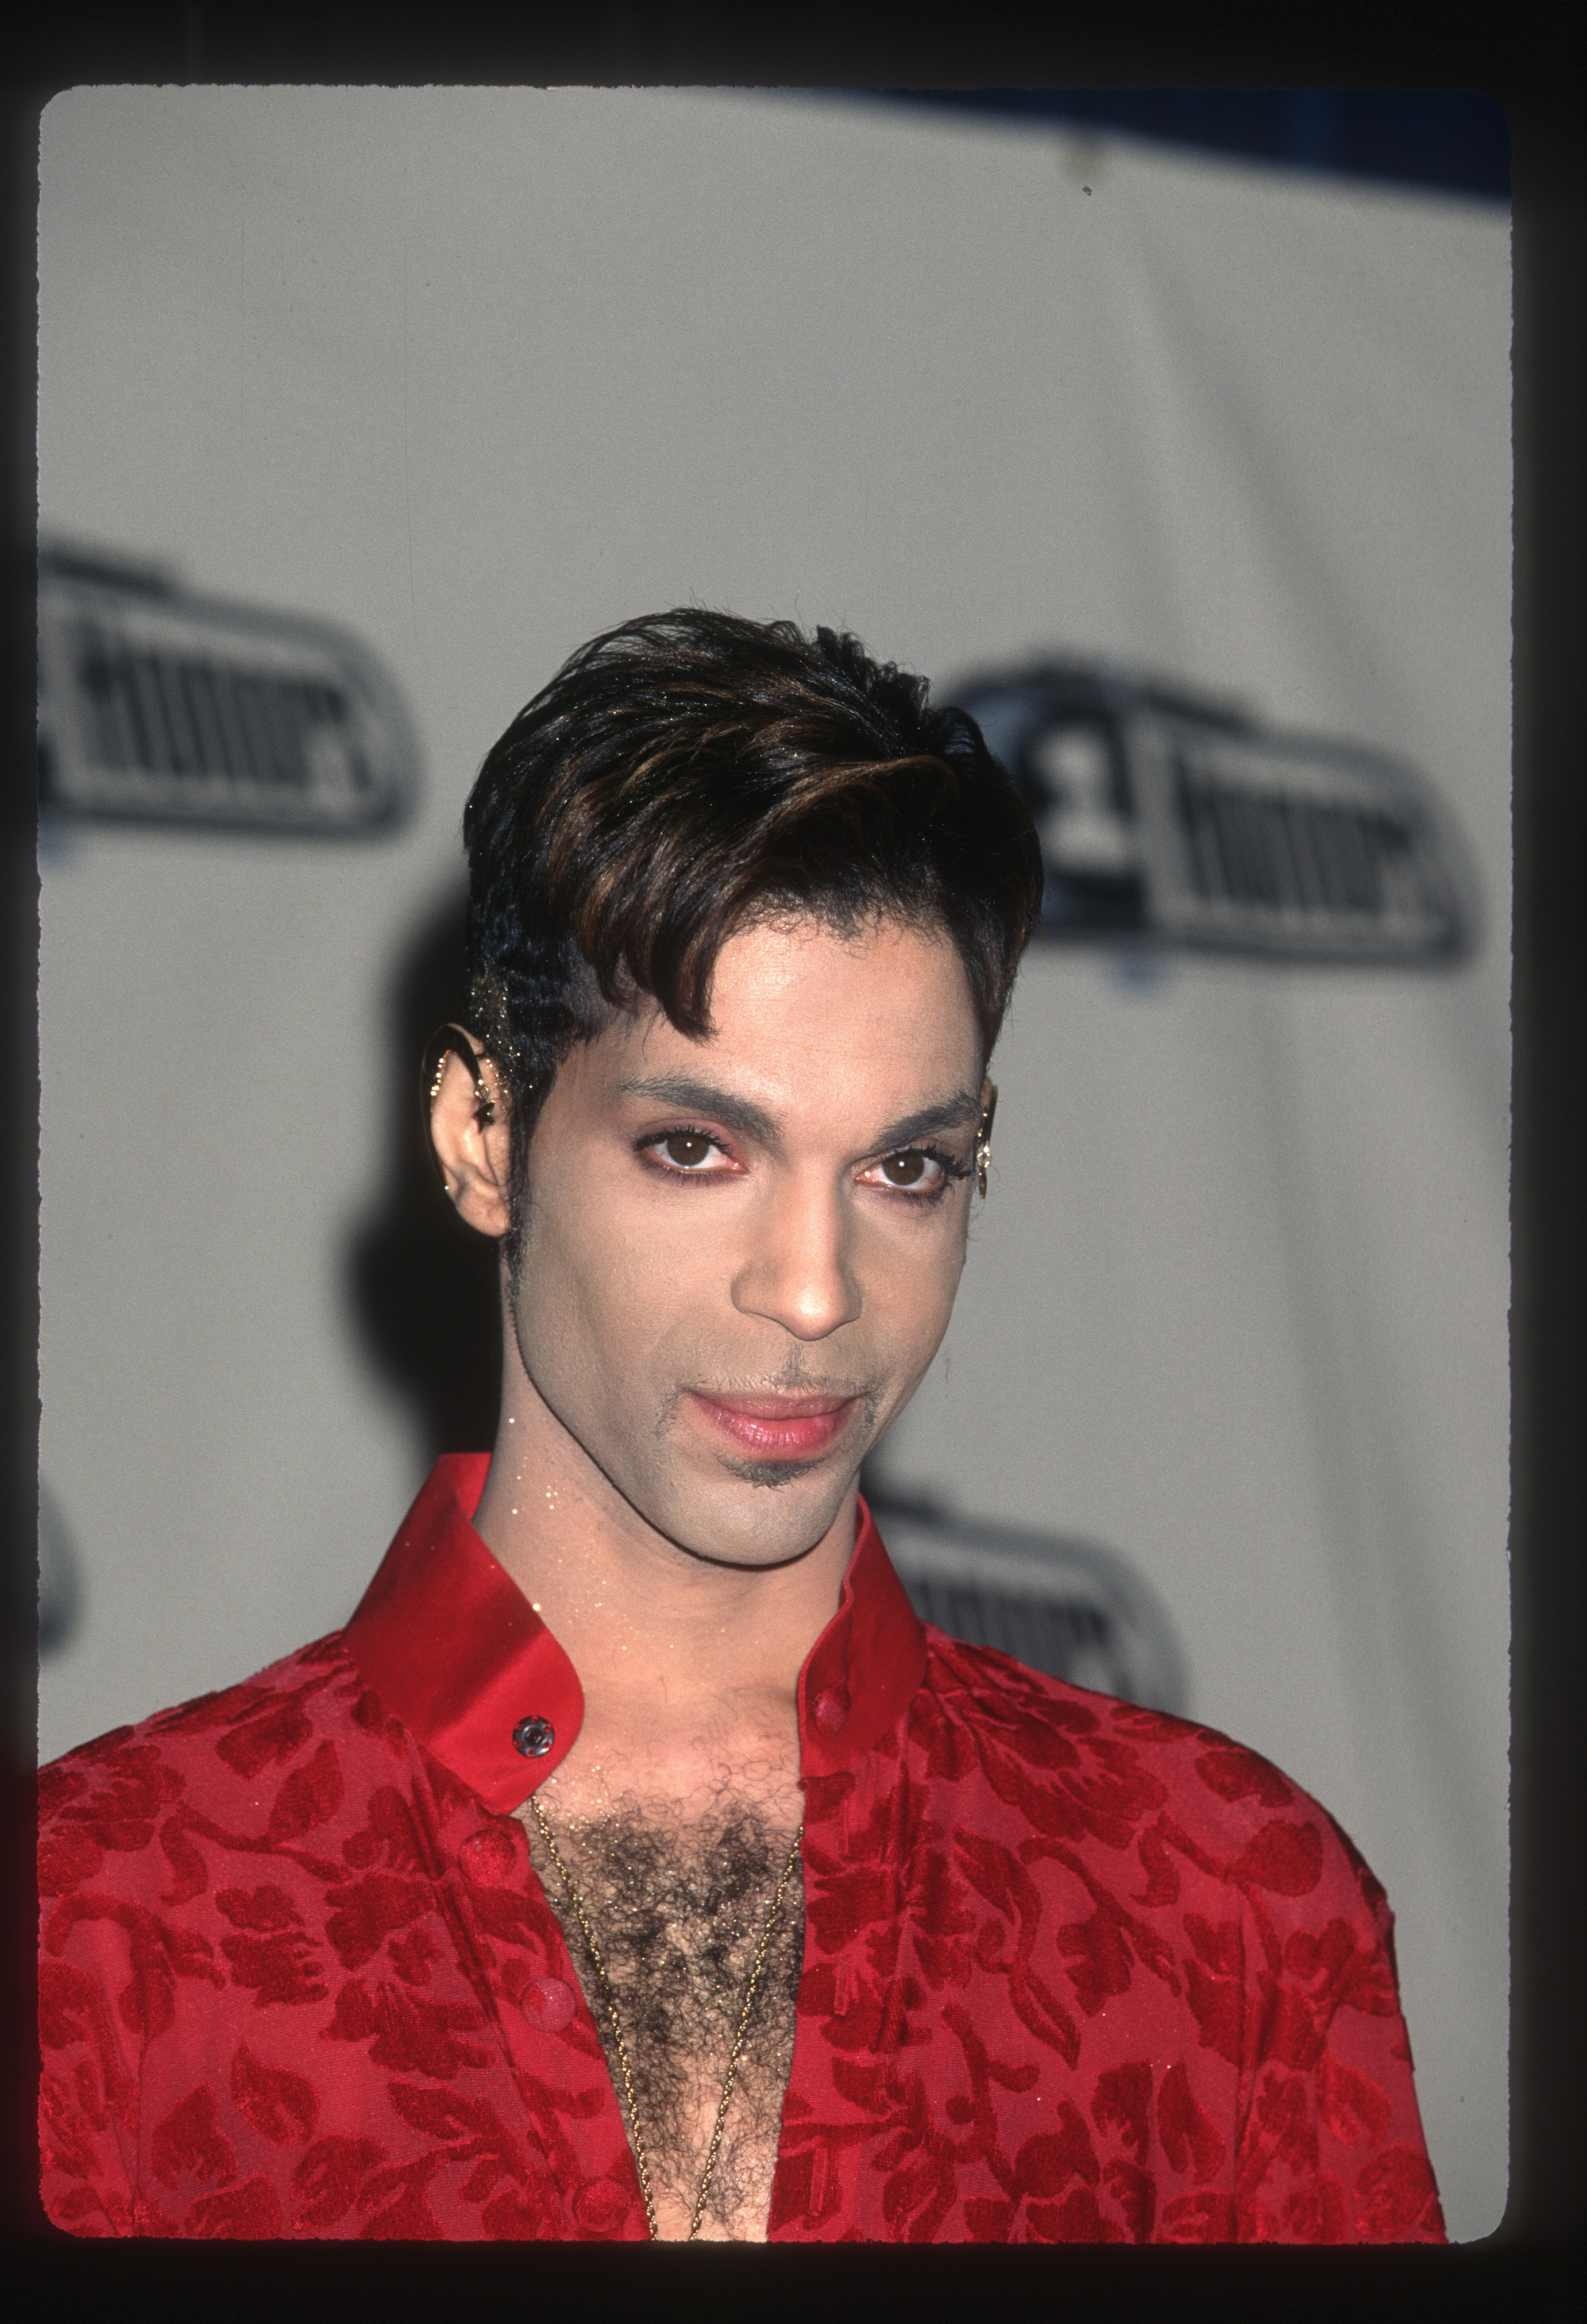 Prince attends theVH-1 Honors Awards Show on April 12, 1997 in Universal City, California | Source: Getty Images